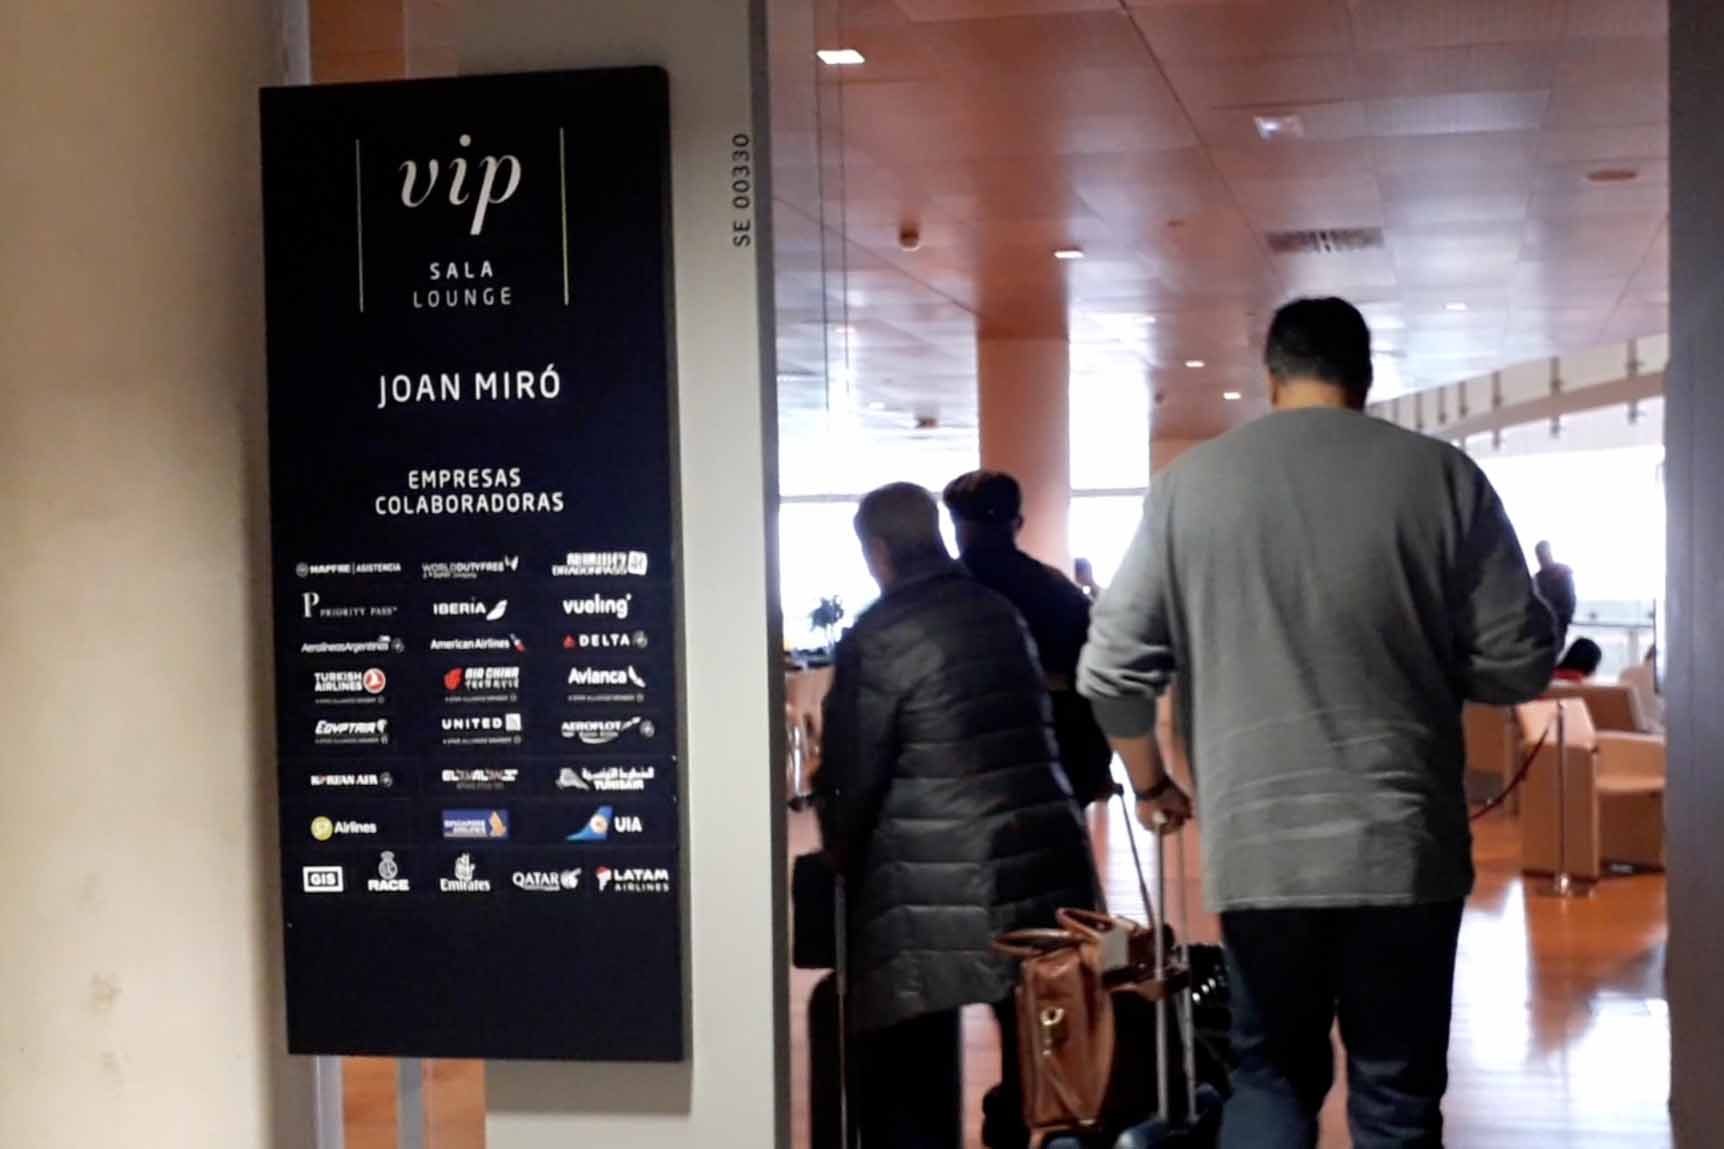 Video: Review of VIP Airport Lounge Miro at Barcelona Airport